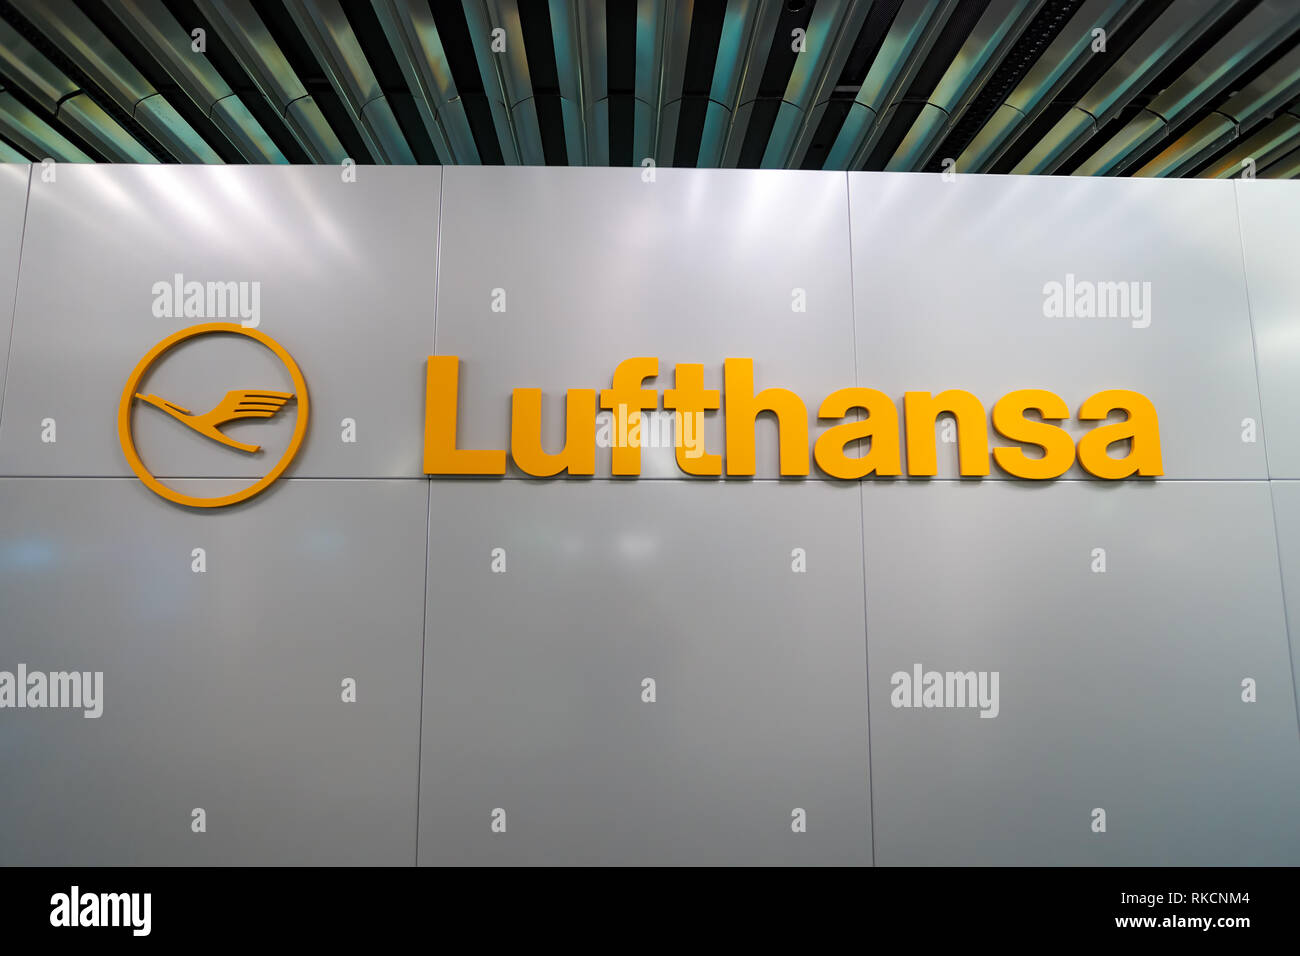 FRANKFURT, GERMANY - APRIL 07, 2016: close up shot of Lufthansa logo. Deutsche Lufthansa AG, commonly known as Lufthansa is a major German airline. Stock Photo